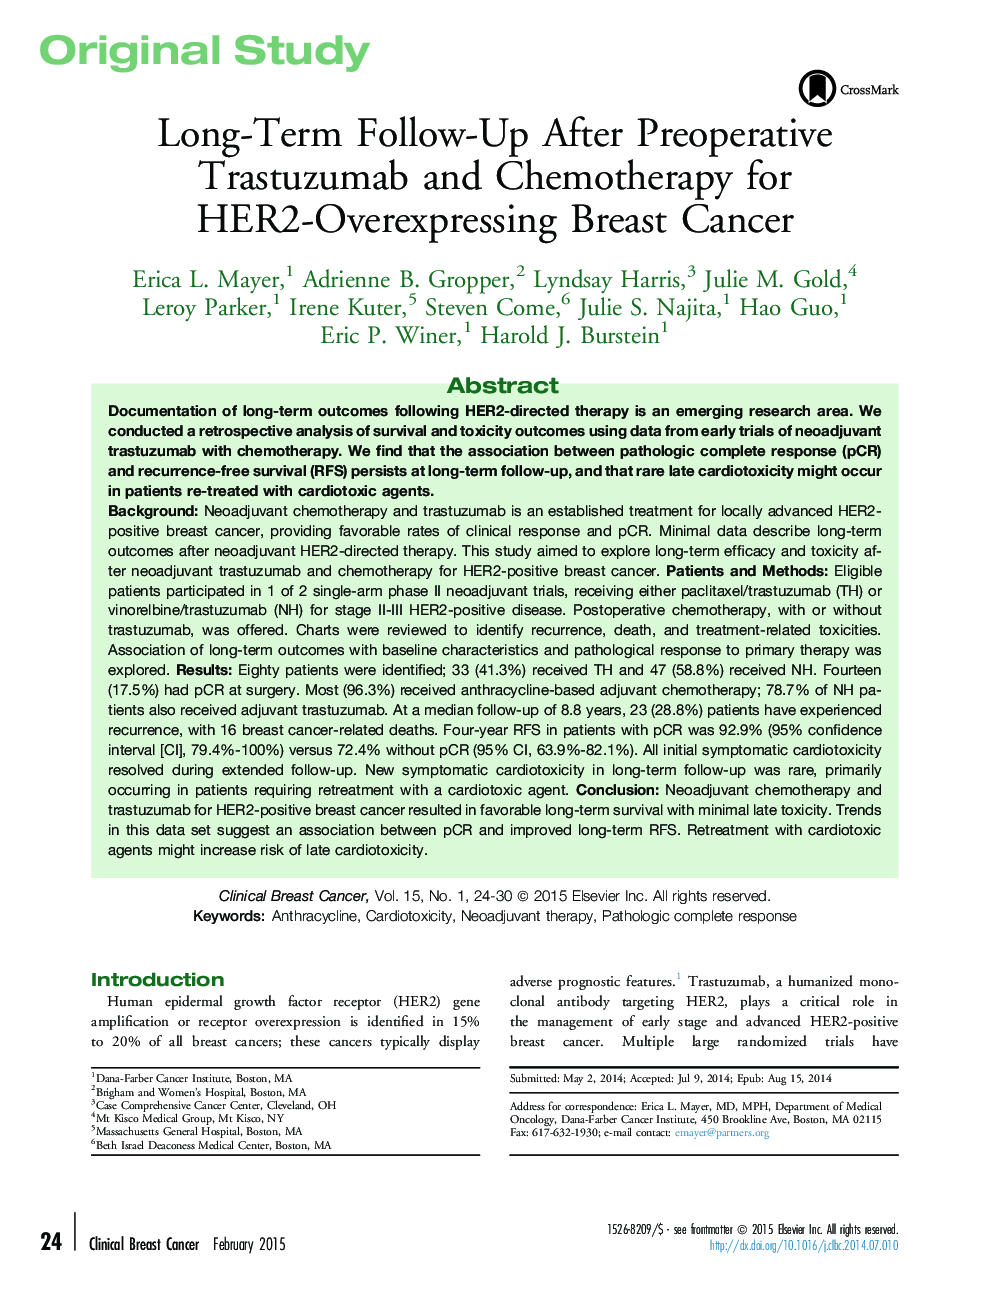 Original StudyLong-Term Follow-Up After Preoperative Trastuzumab and Chemotherapy for HER2-Overexpressing Breast Cancer